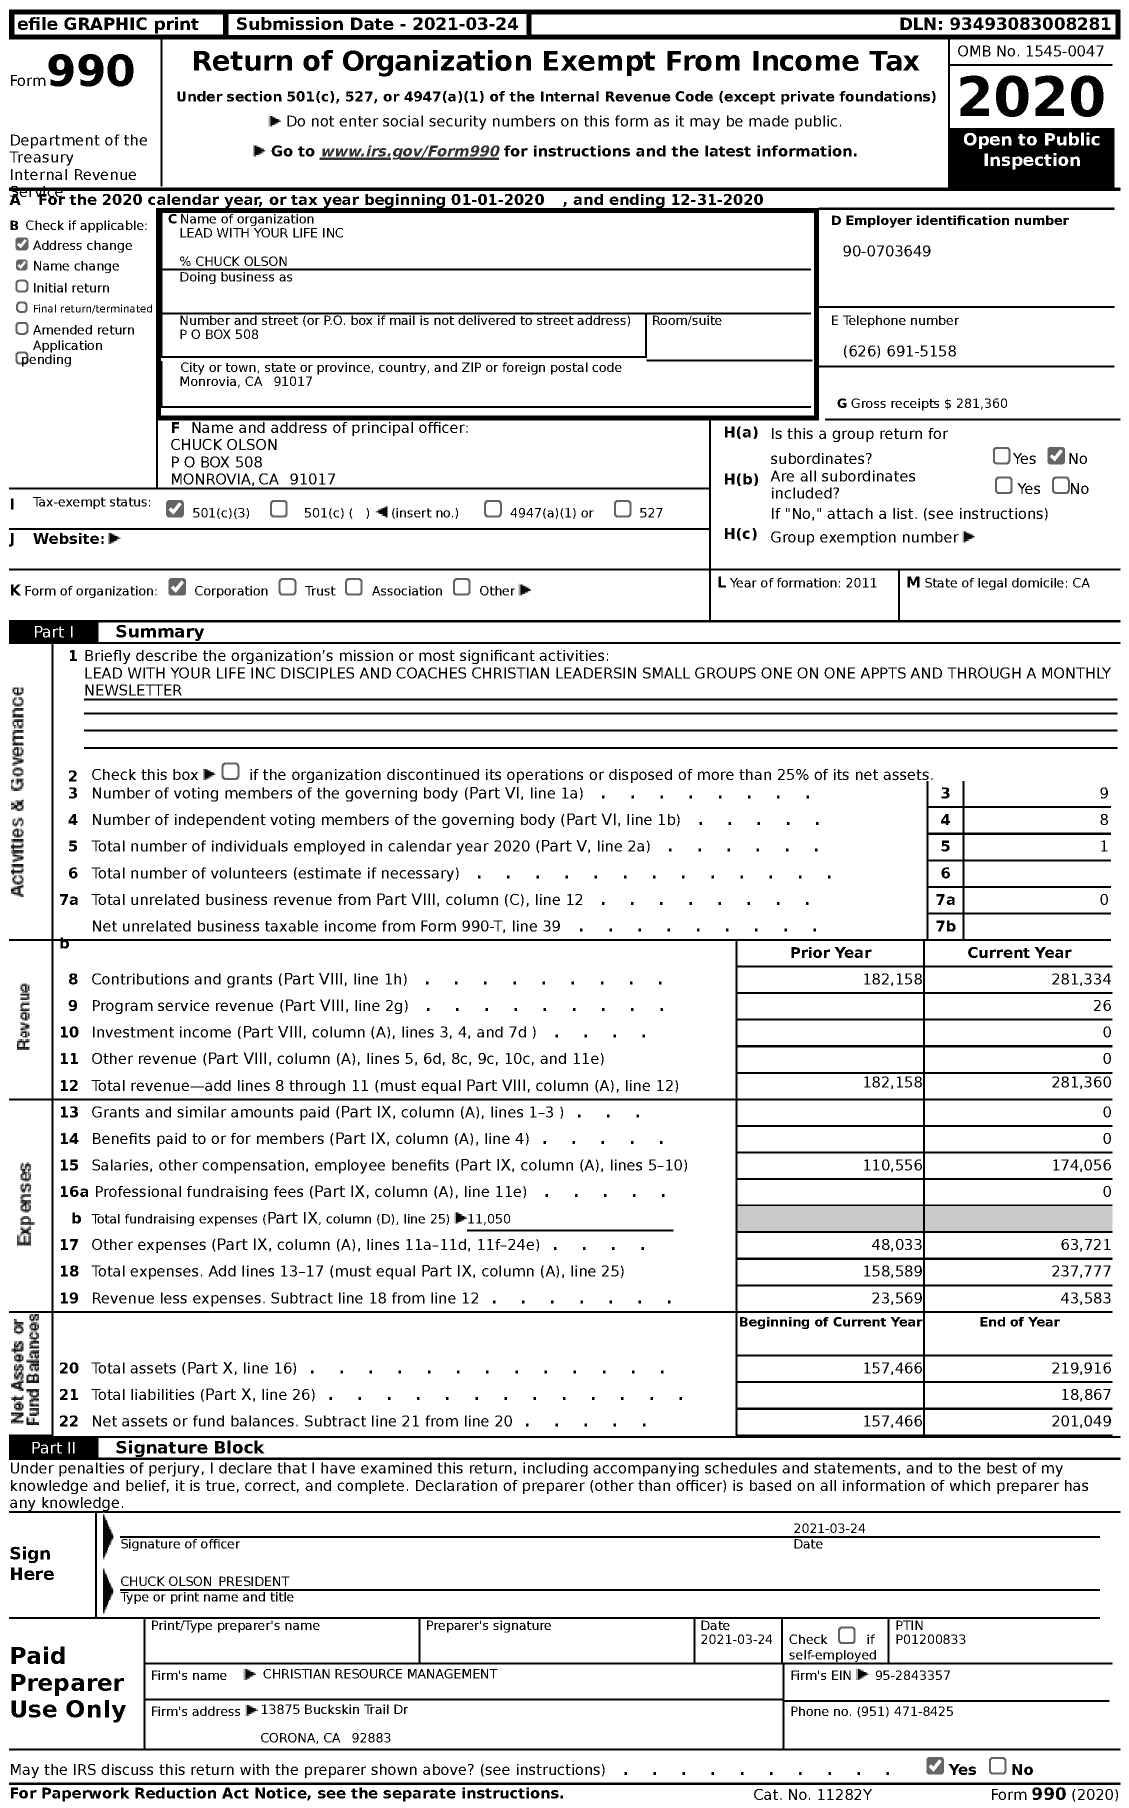 Image of first page of 2020 Form 990 for Lead with Your Life